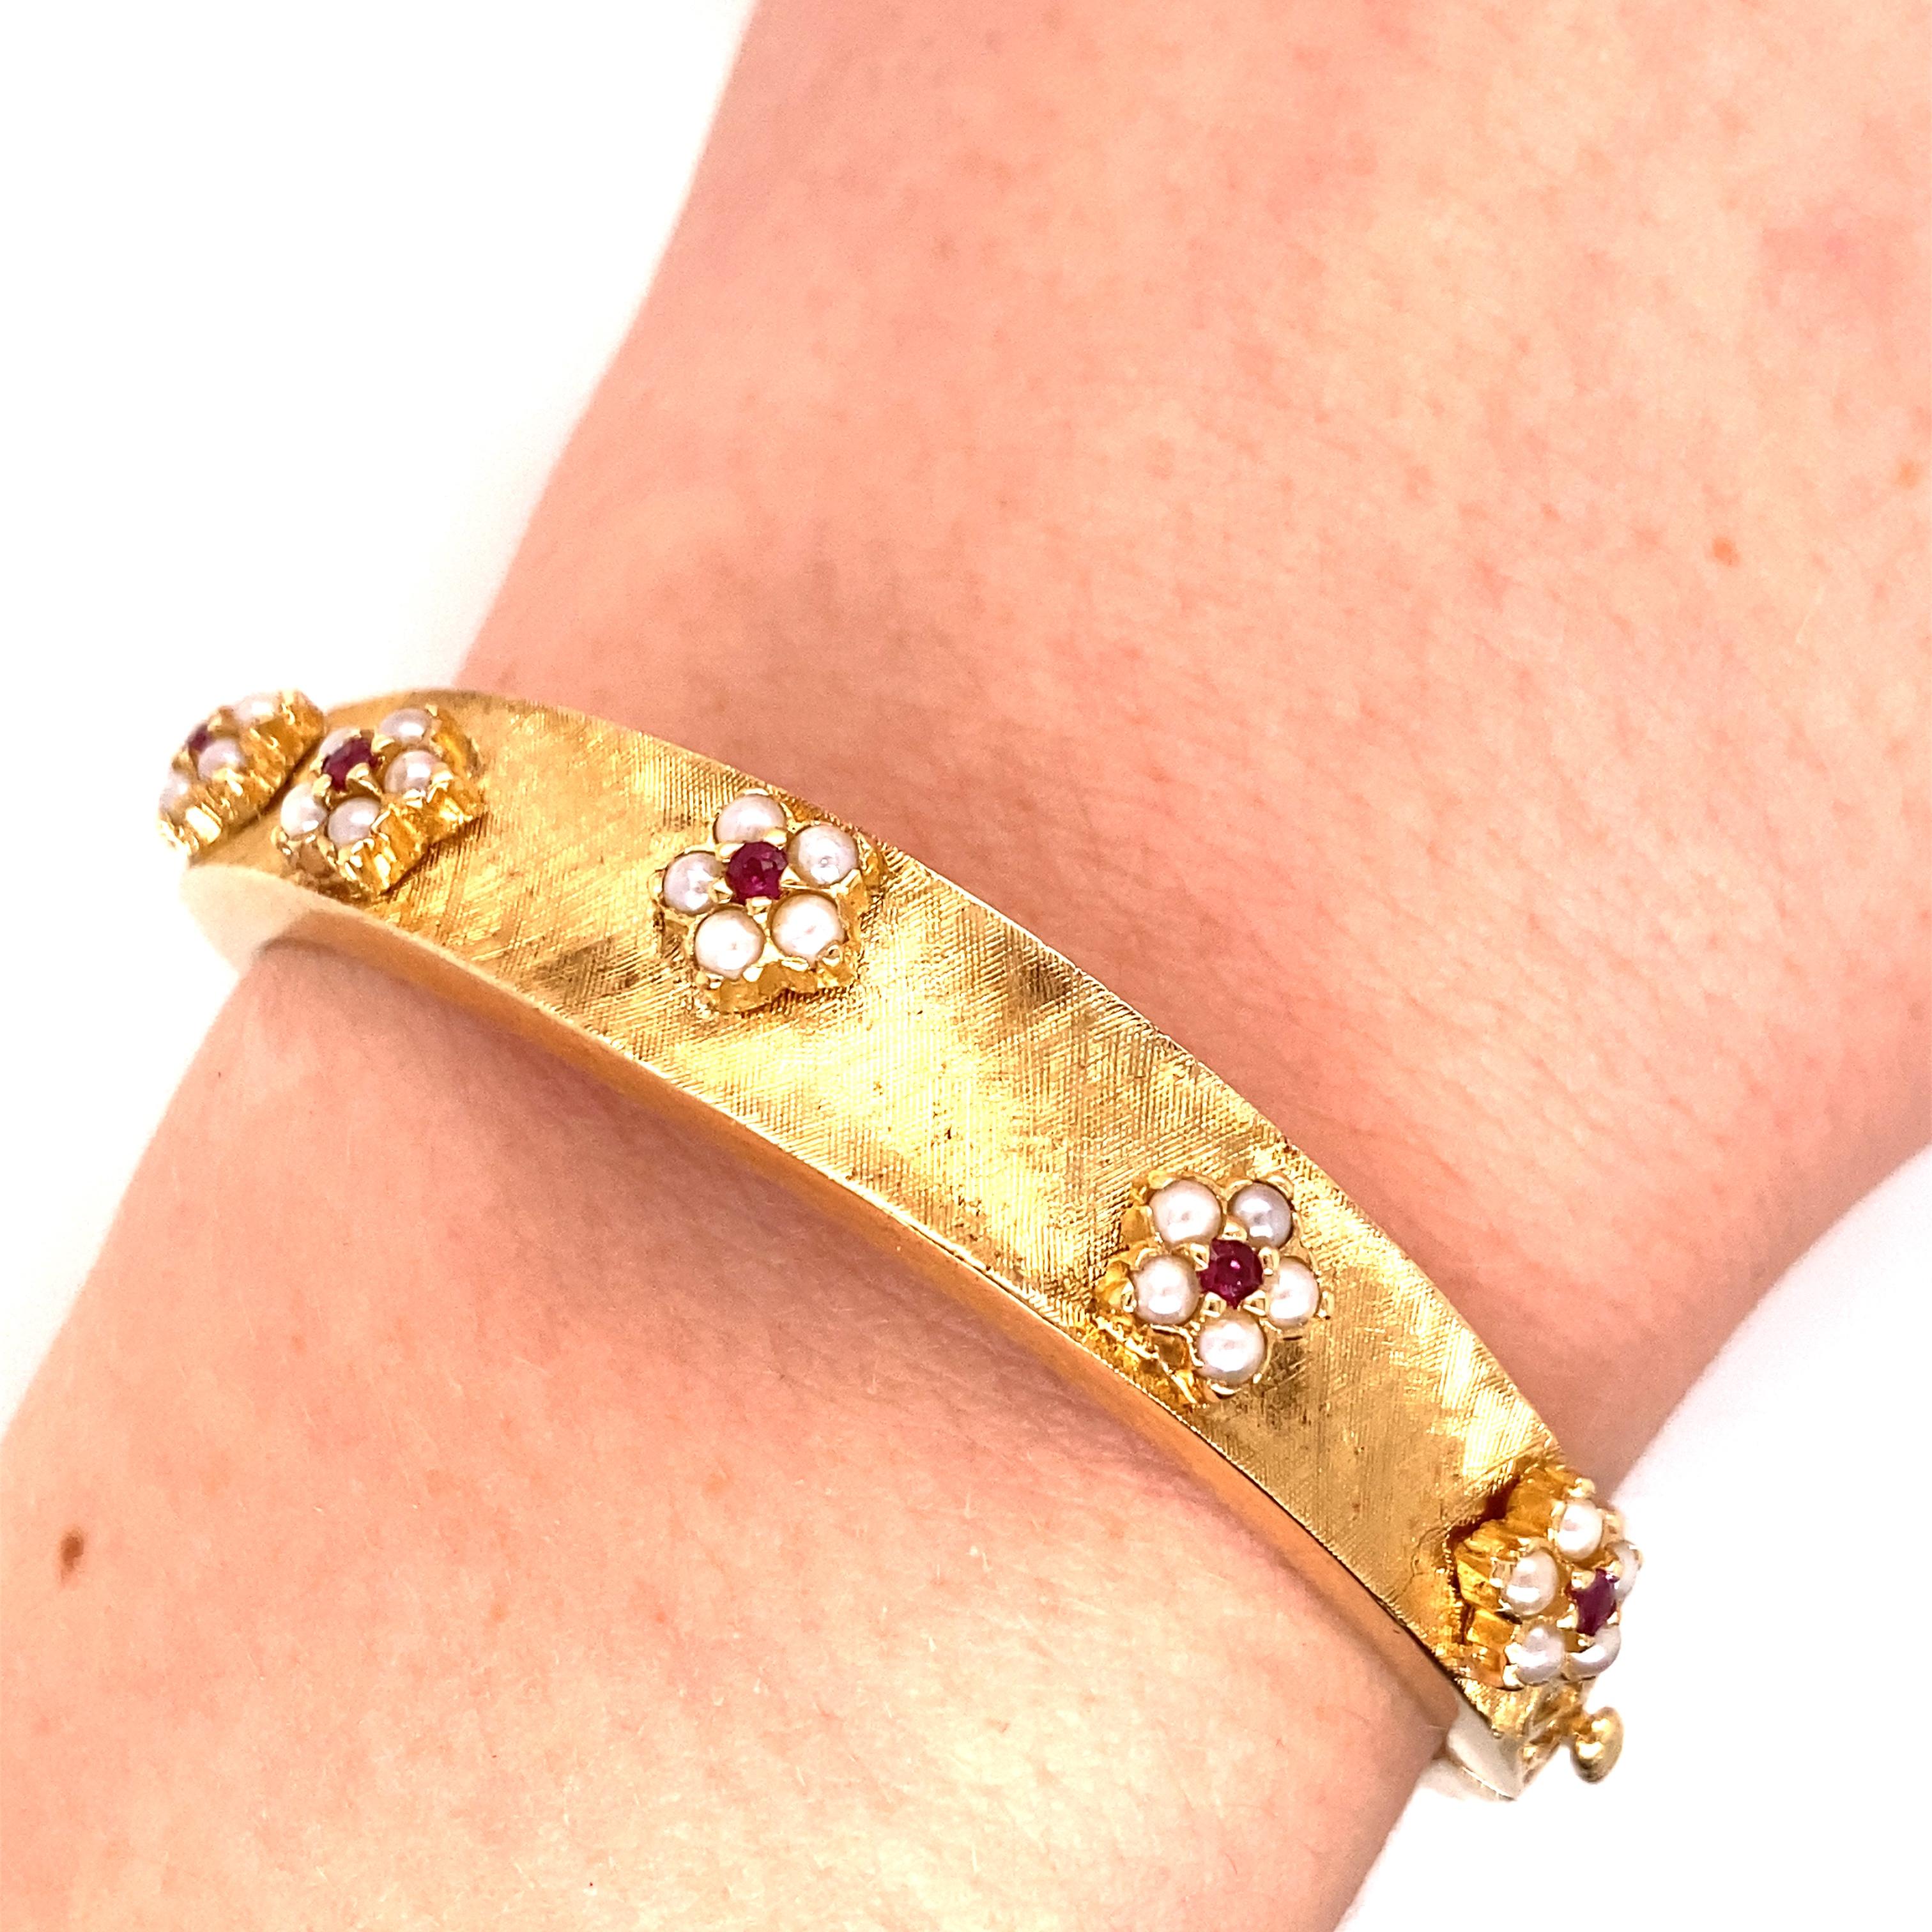 Vintage 14K Yellow Gold Bangle Bracelet with Ruby and Pearl Flowers -  There are 5 flowers scattered on top with a florentine/brushed finish on the gold. There is some filigree detail on the side as well.The width of the bangle is 10.3mm on top and